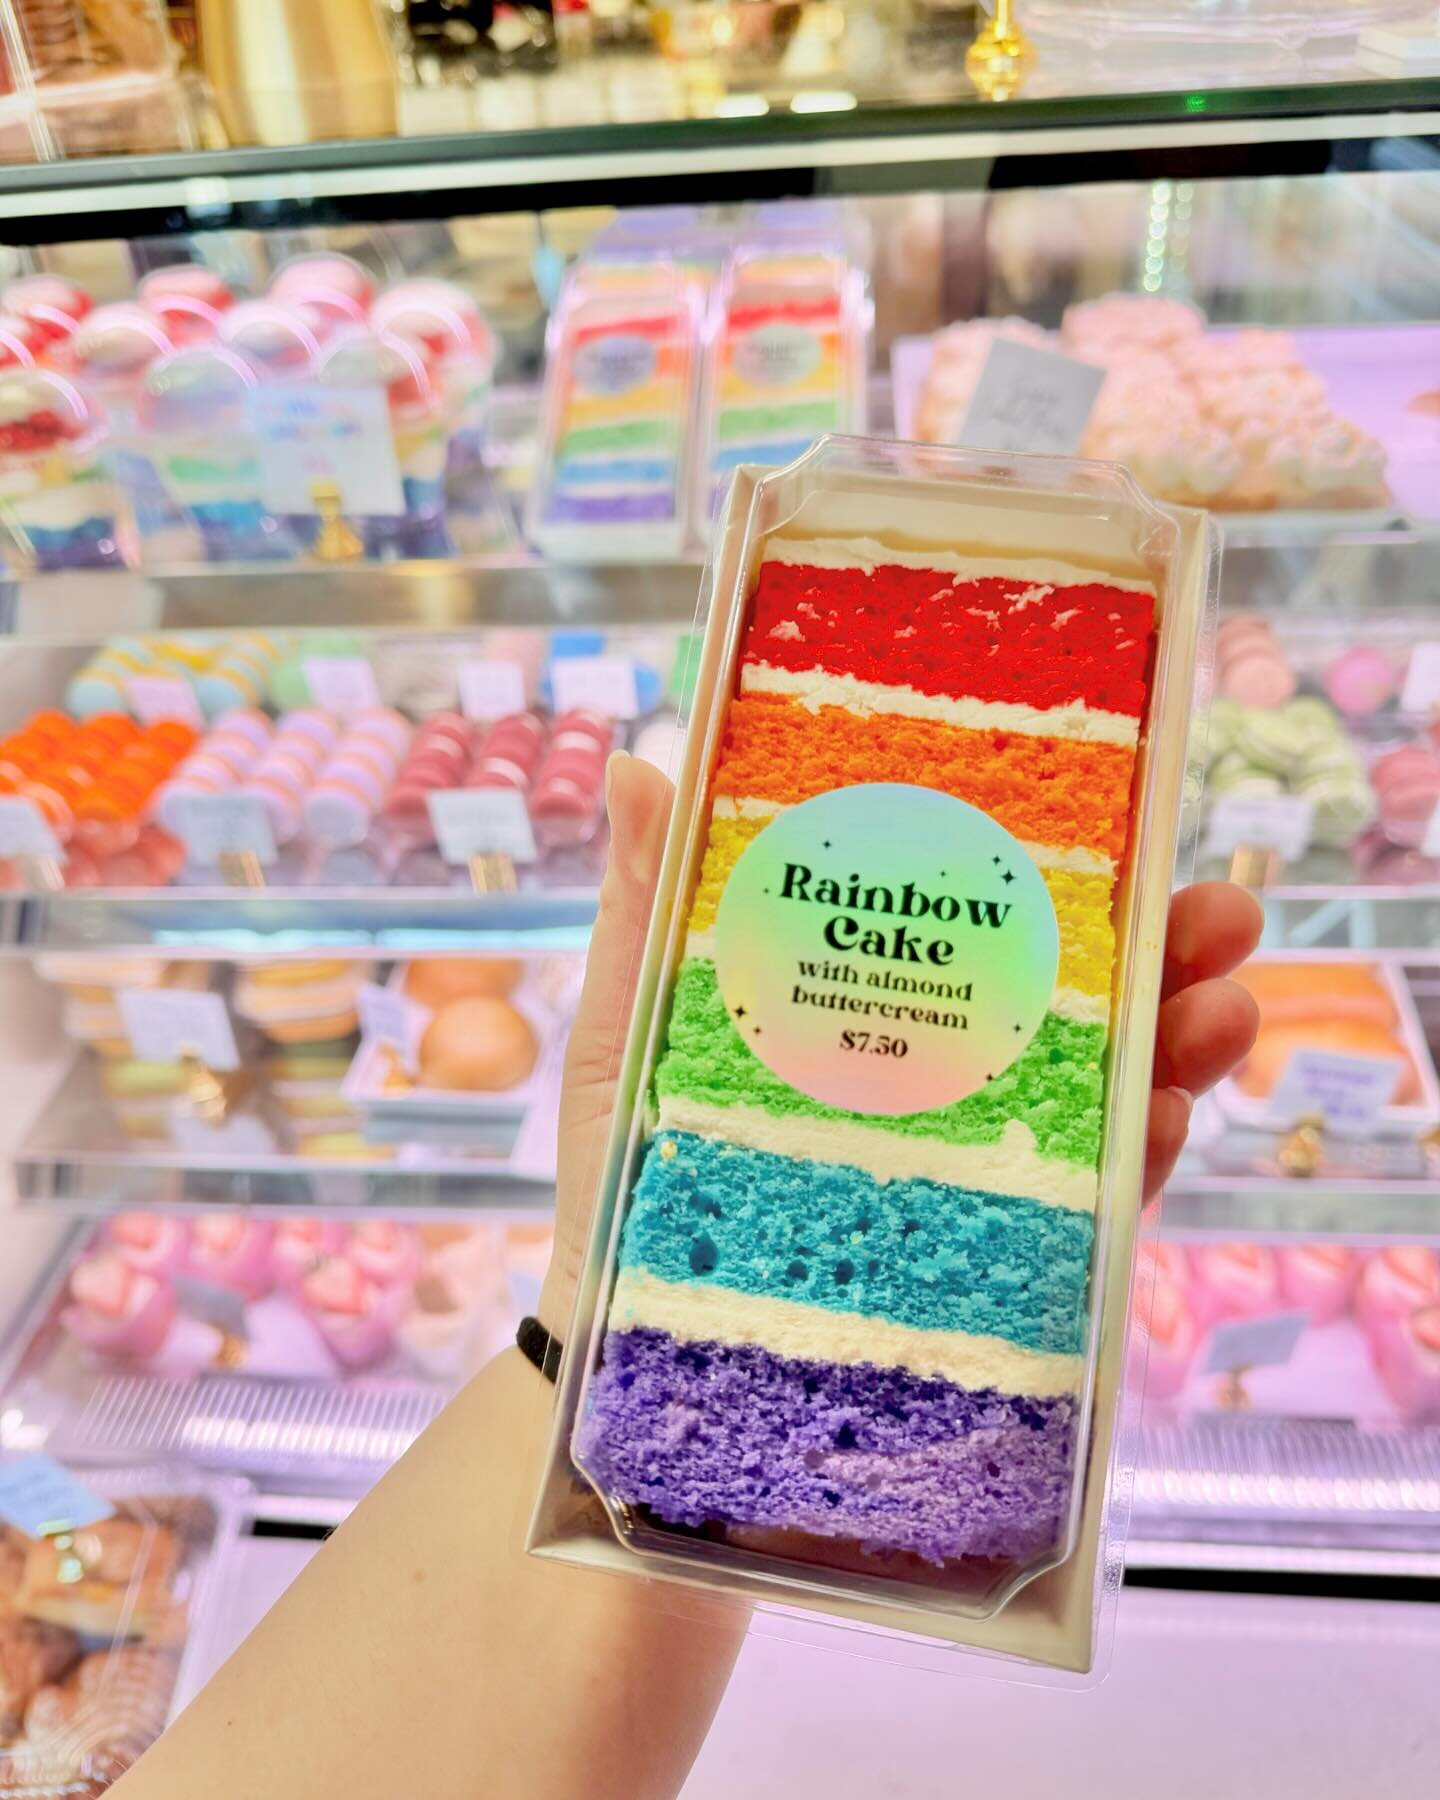 Rainbow cake slices just hit the shelf! The sun is out and cases are fully stocked so come in for a sweet treat and say hello 🫶